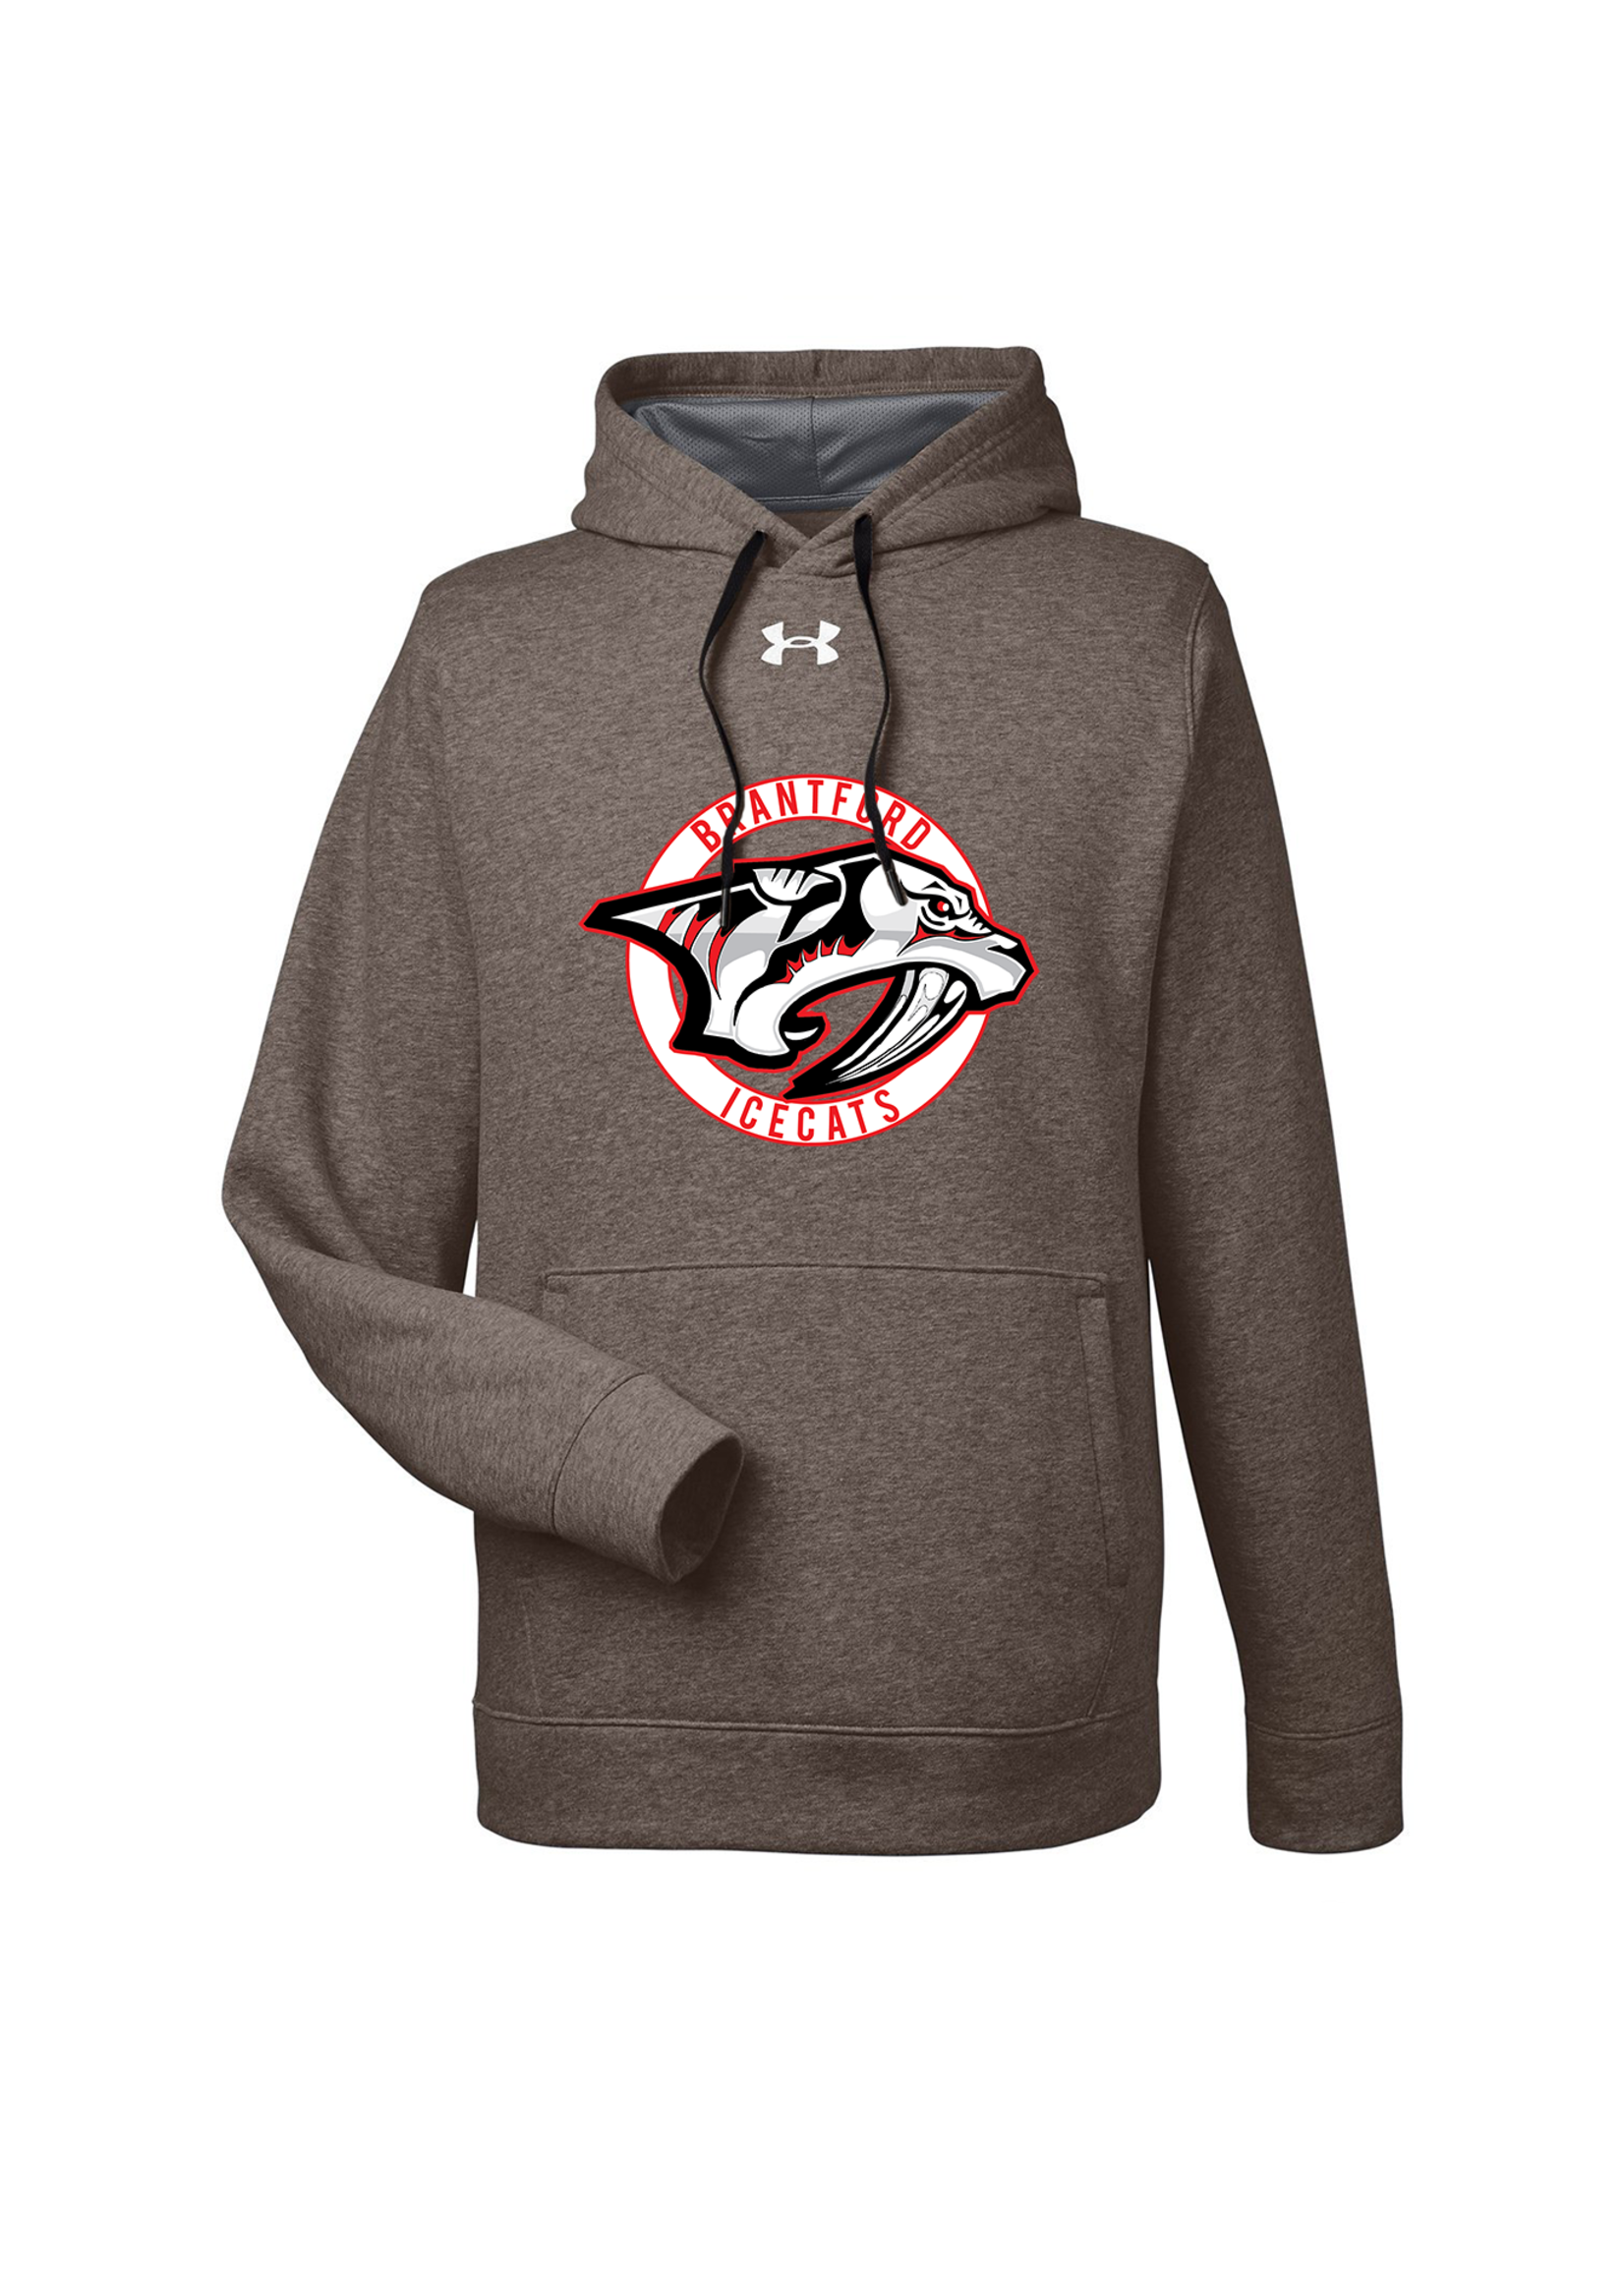 UNDER ARMOUR Ice Cats Youth Hustle Fleece Hoodie